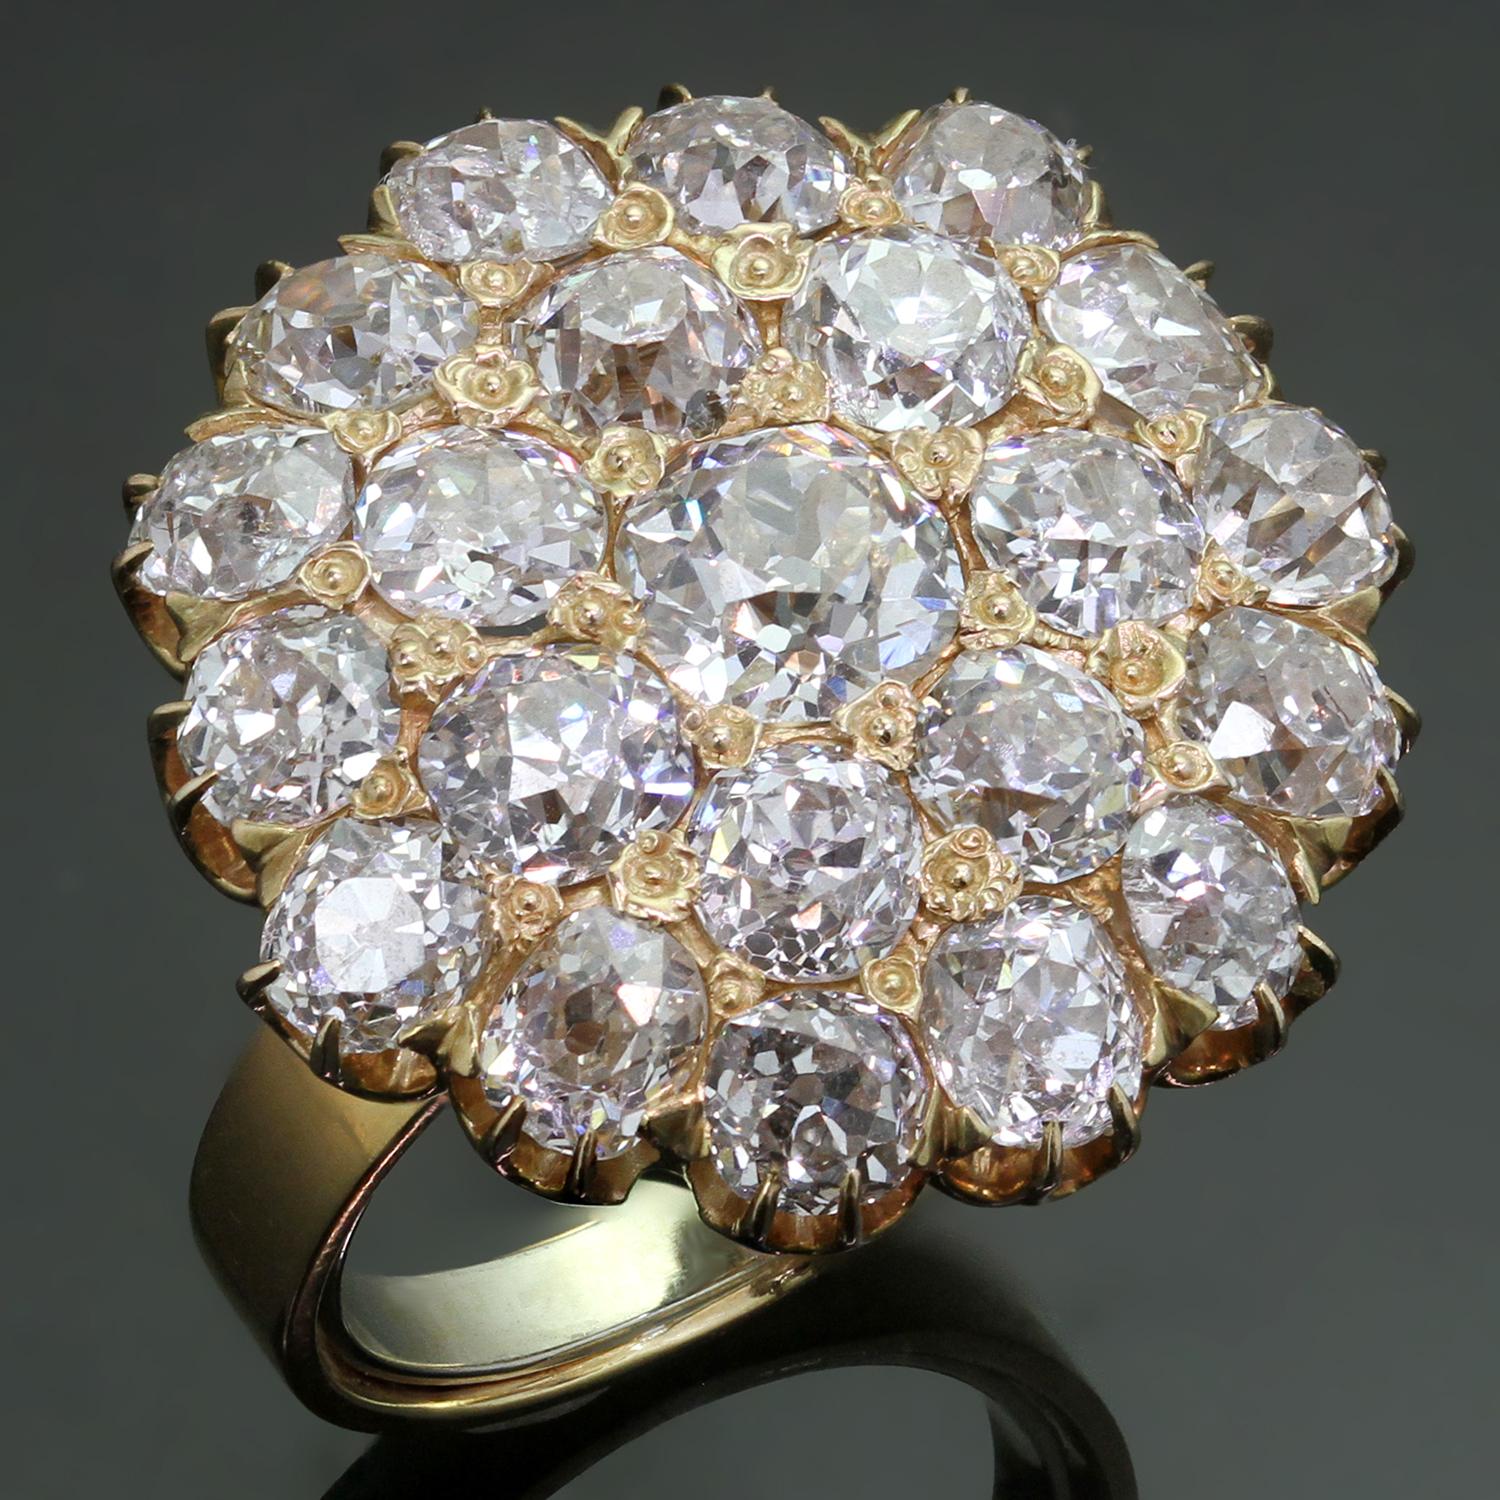 This exquisite antique ring is crafted in 18k rose gold and features a very sparkling round crown set with old mine-cut H-I SI1-SI2 diamonds weighing an estimated 8.86 carats. Completed with an adjustable inner ring guard. Made in United States